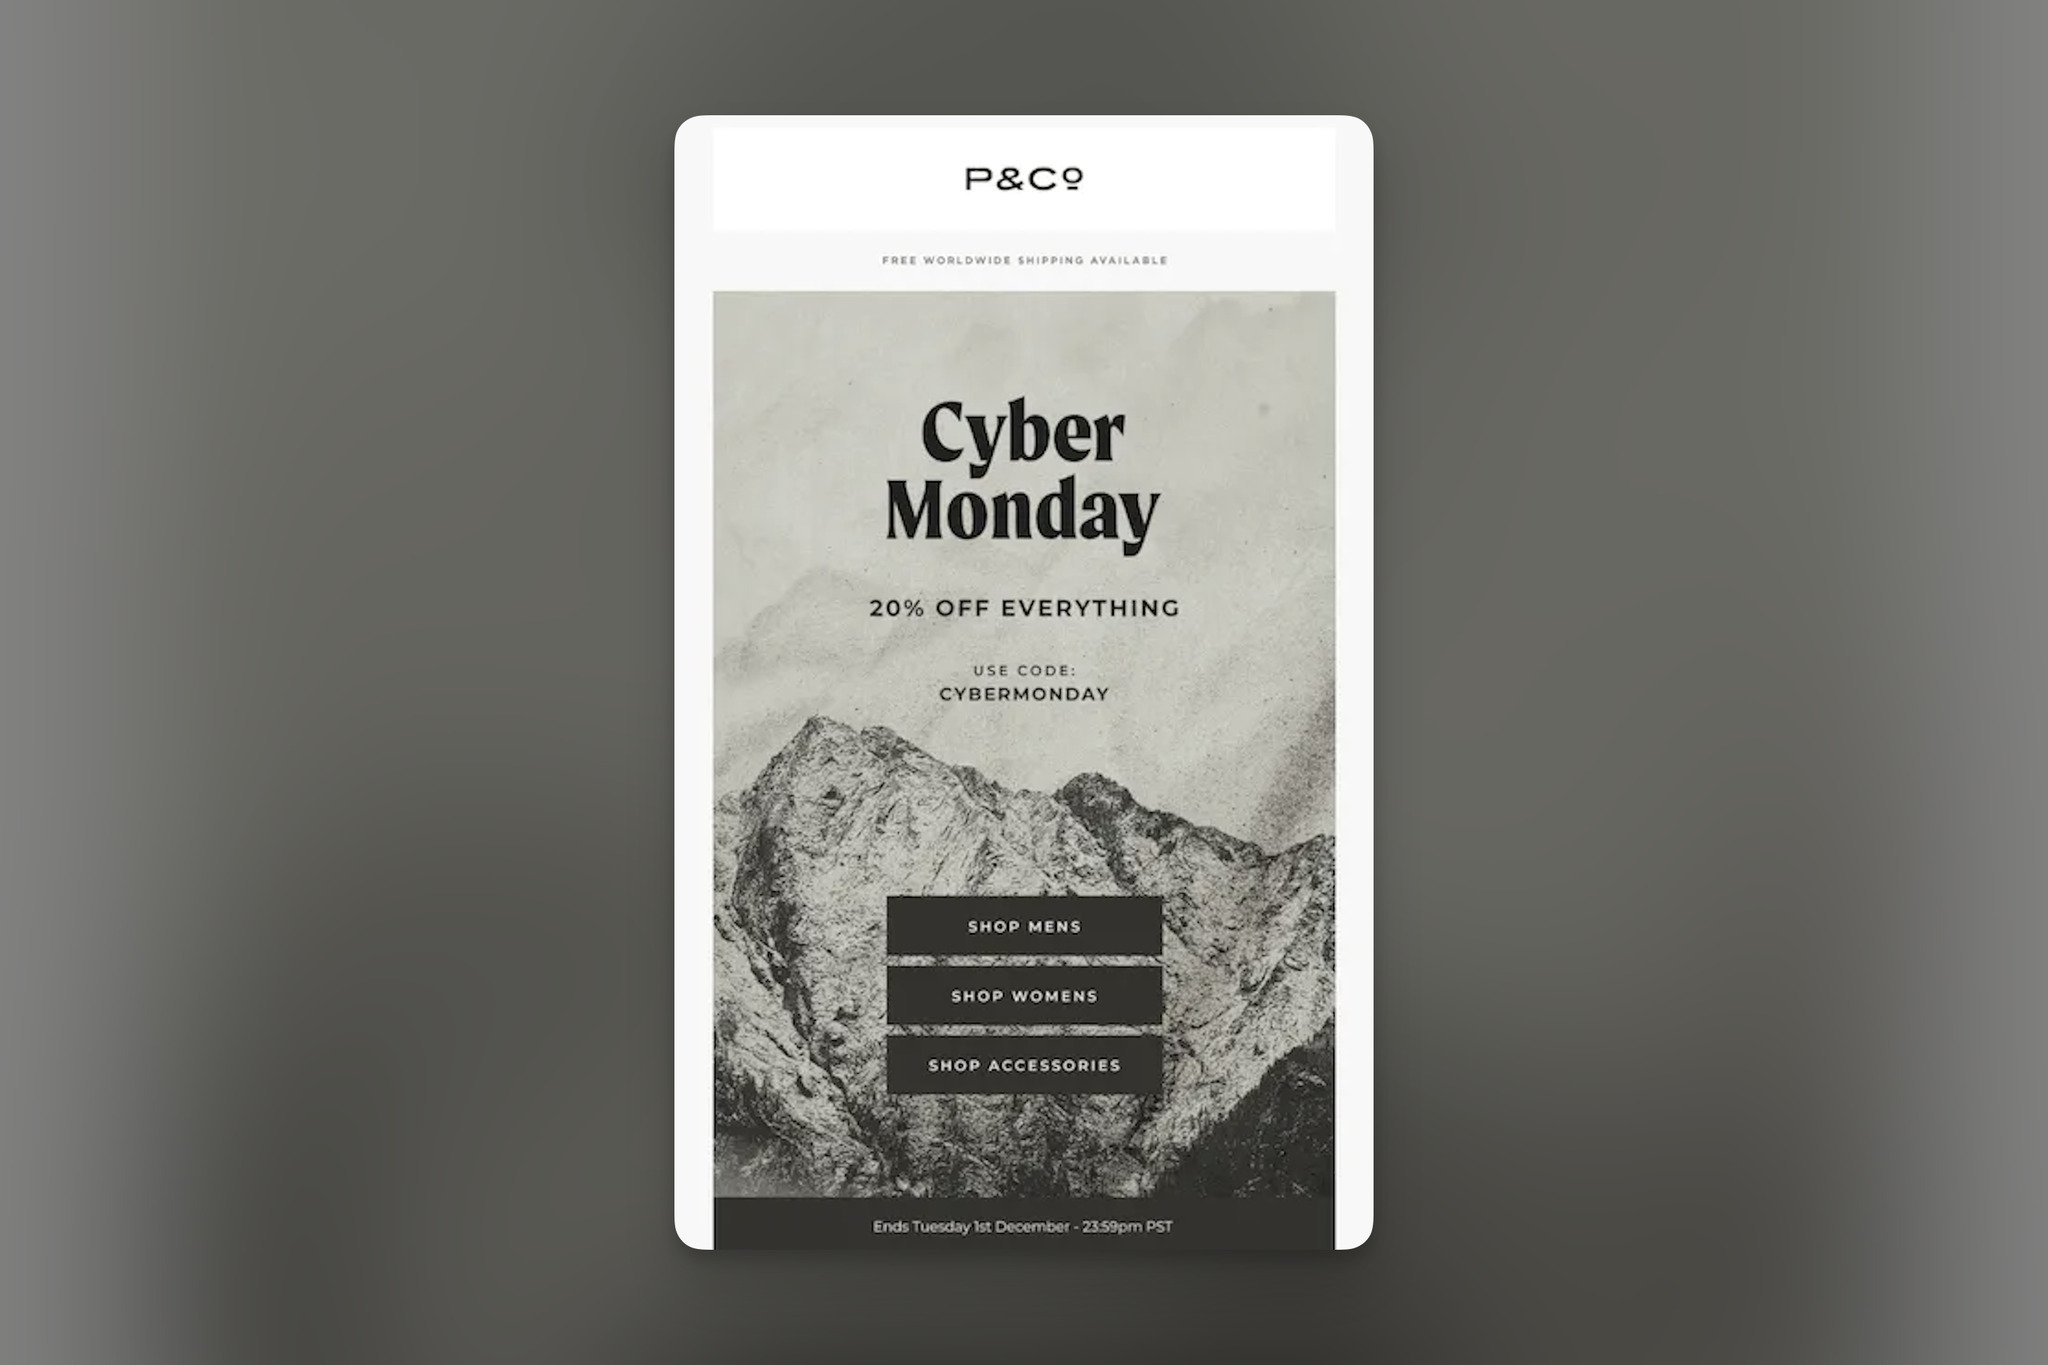 Cyber Monday email with mountains as the background in grey and the “Cyber Monday” headline followed by 3 buttons for shopping